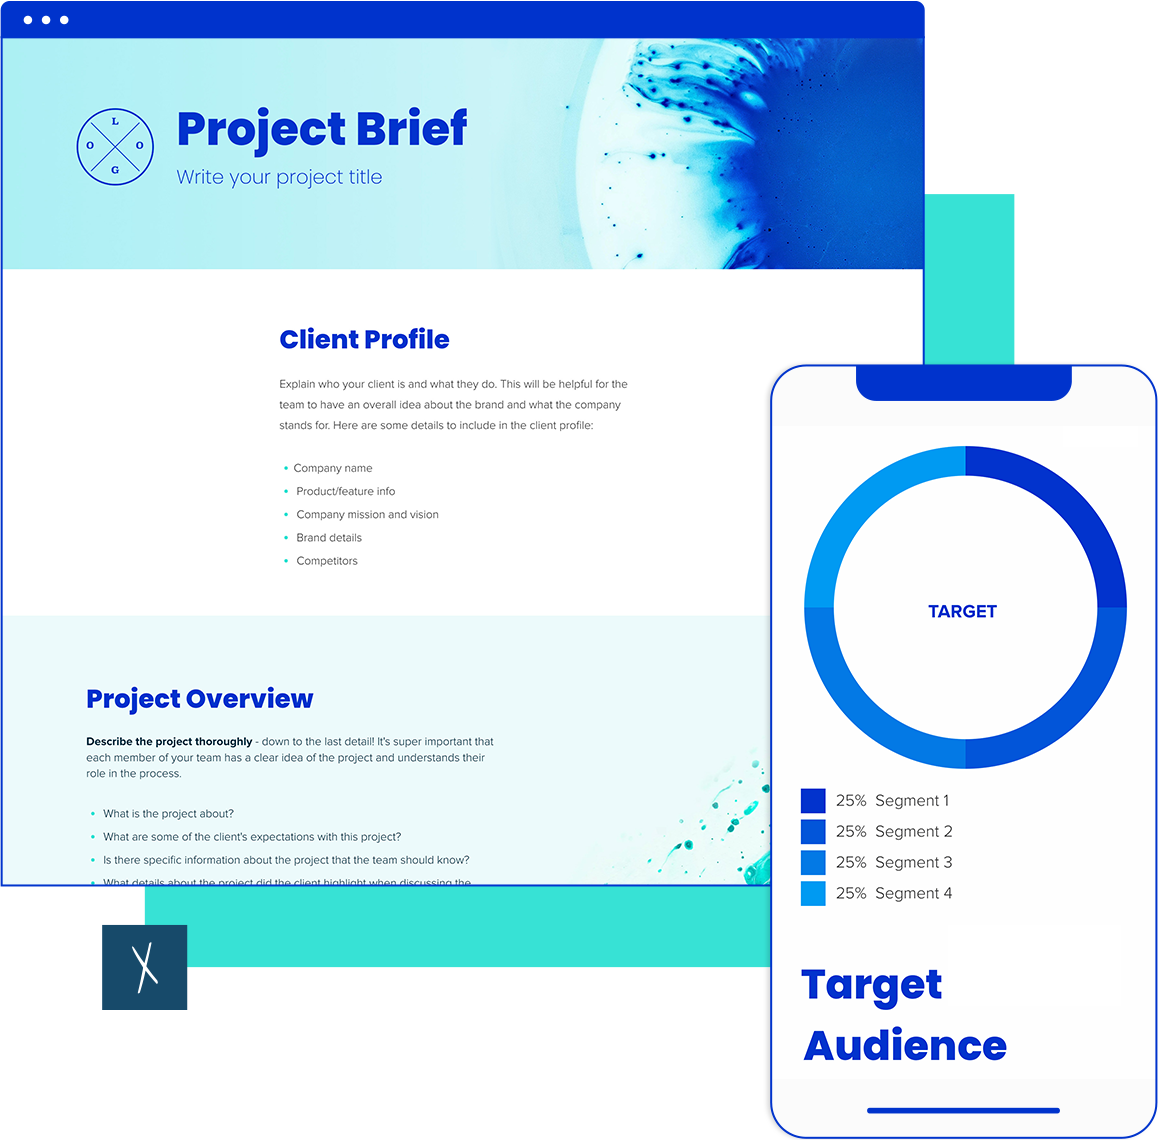 Project Brief Template  | Desktop and Mobile Views